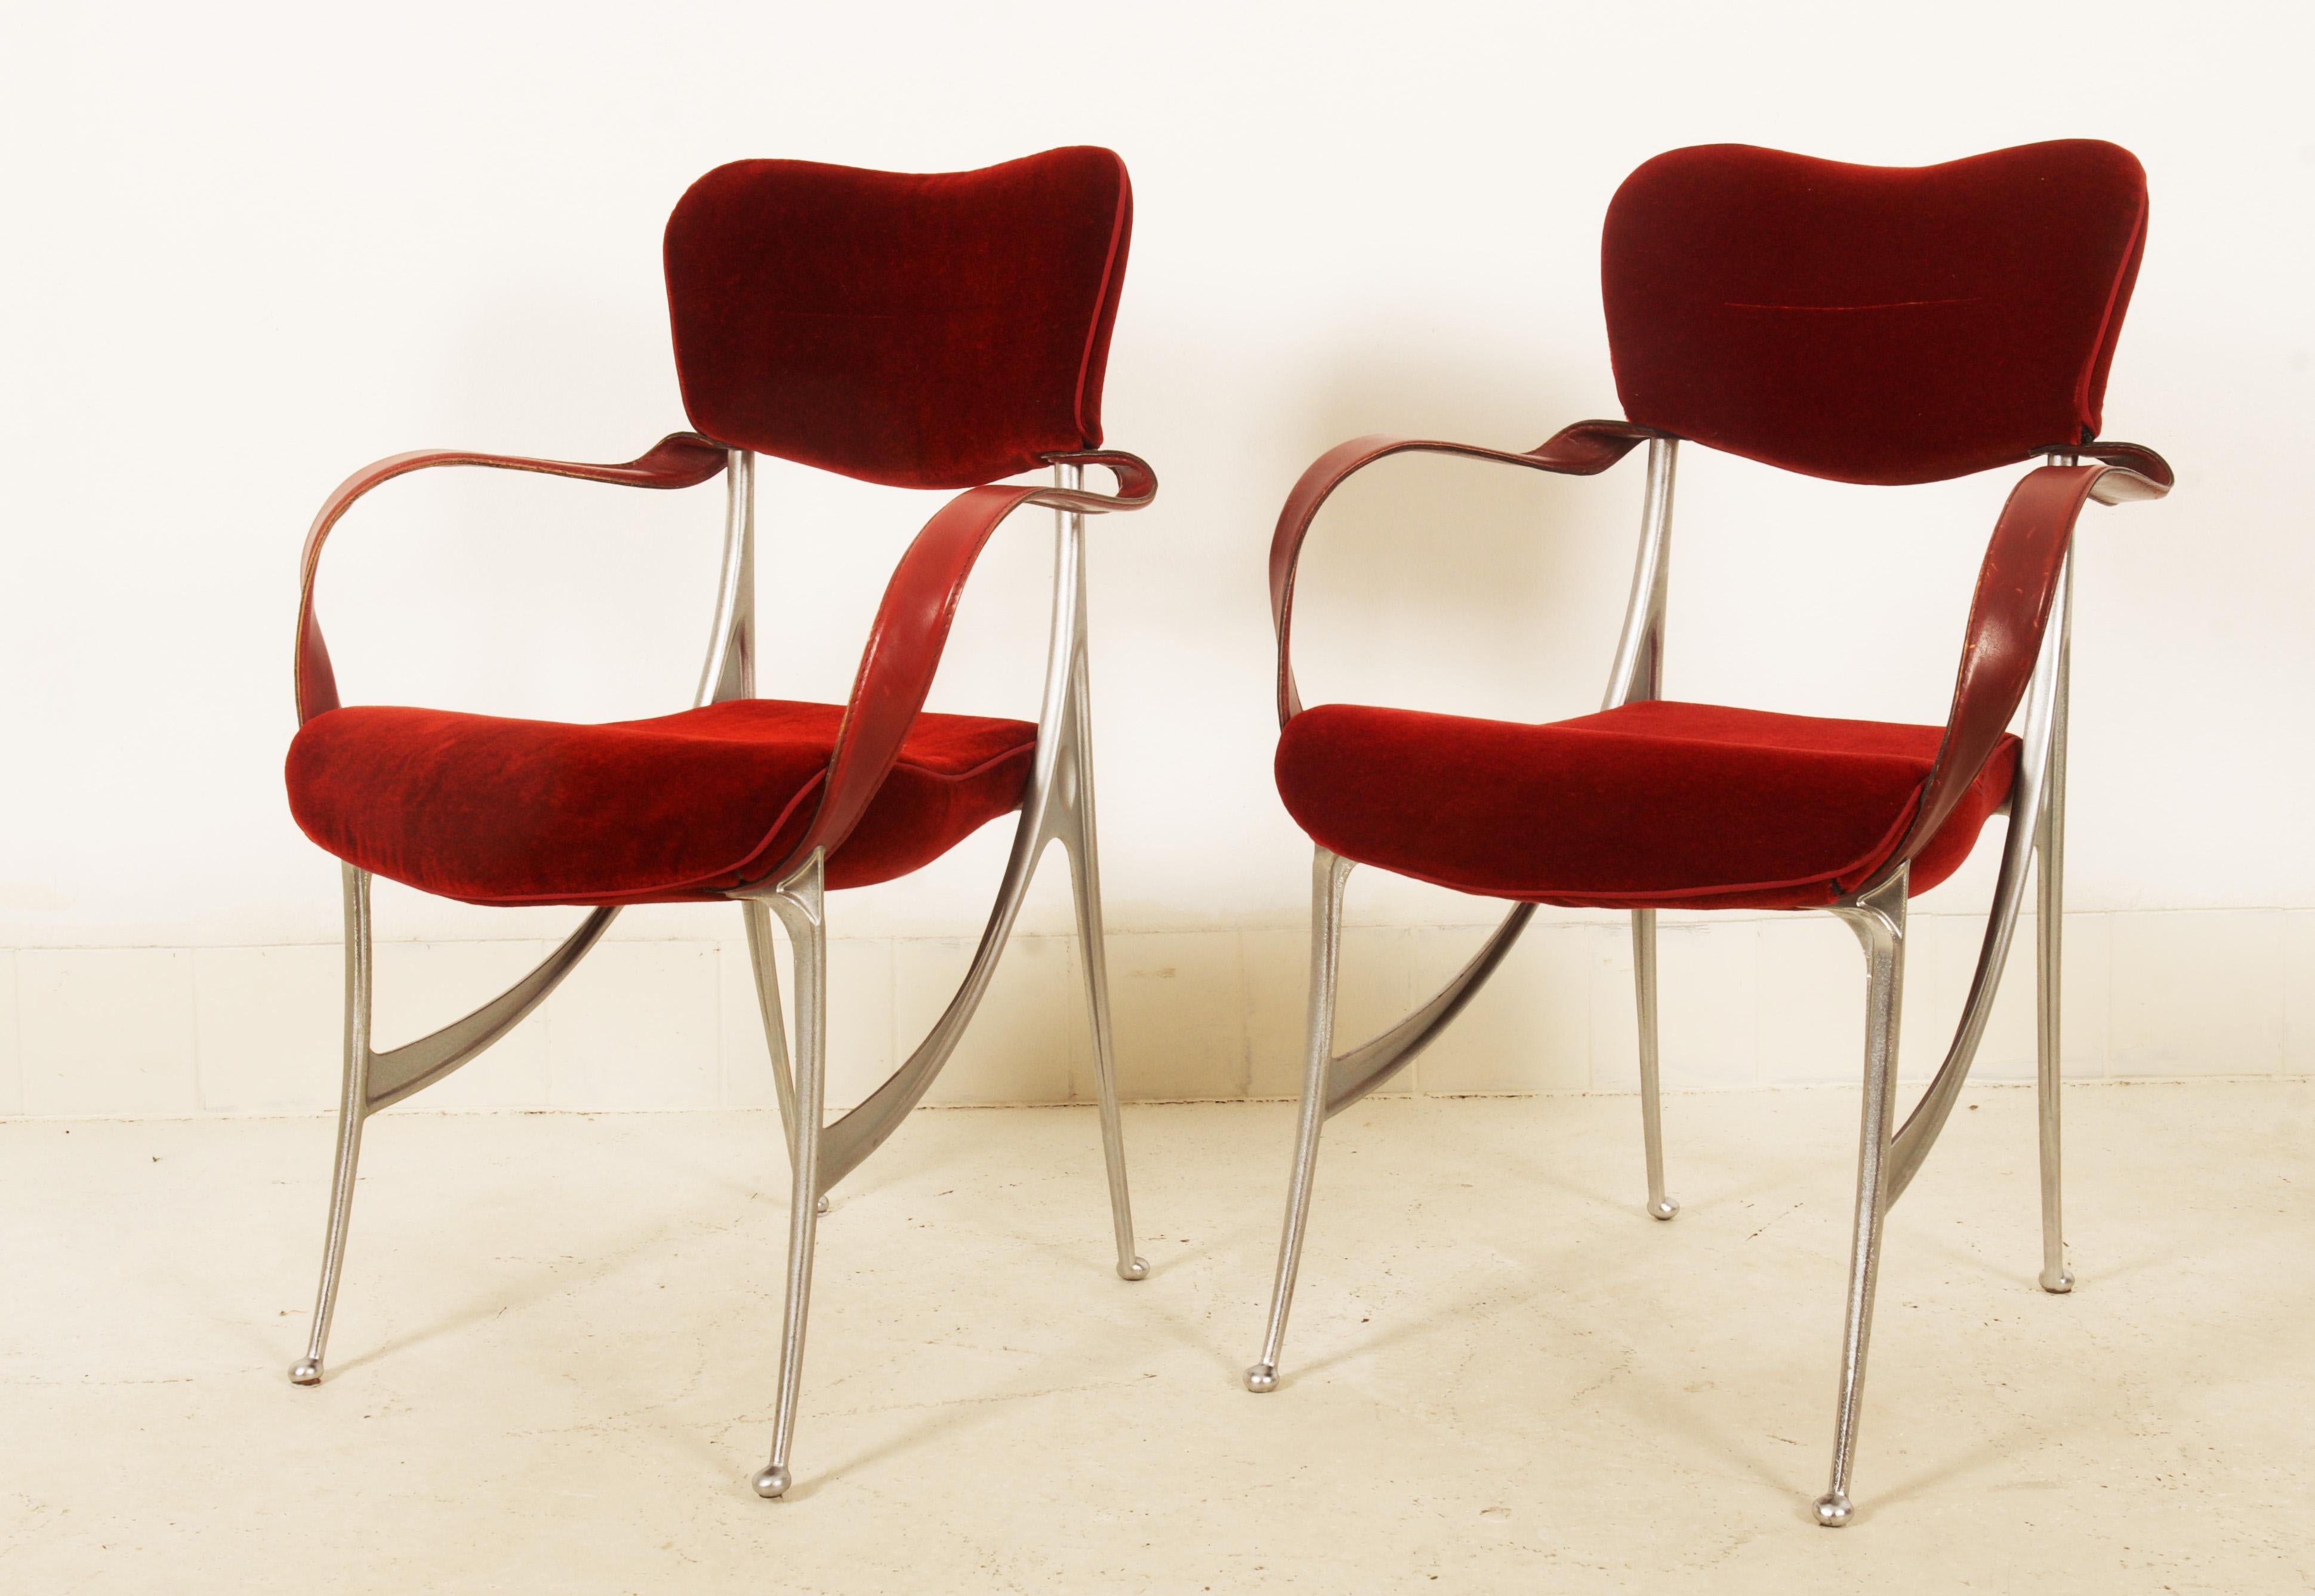 Set of two armchairs model Lucas, designed by Oscar Tusquets for Driade. Designed 1987. Organically shaped cast aluminium frames, dark red velvet velour coverings, steel band armrests featuring leather coverings.